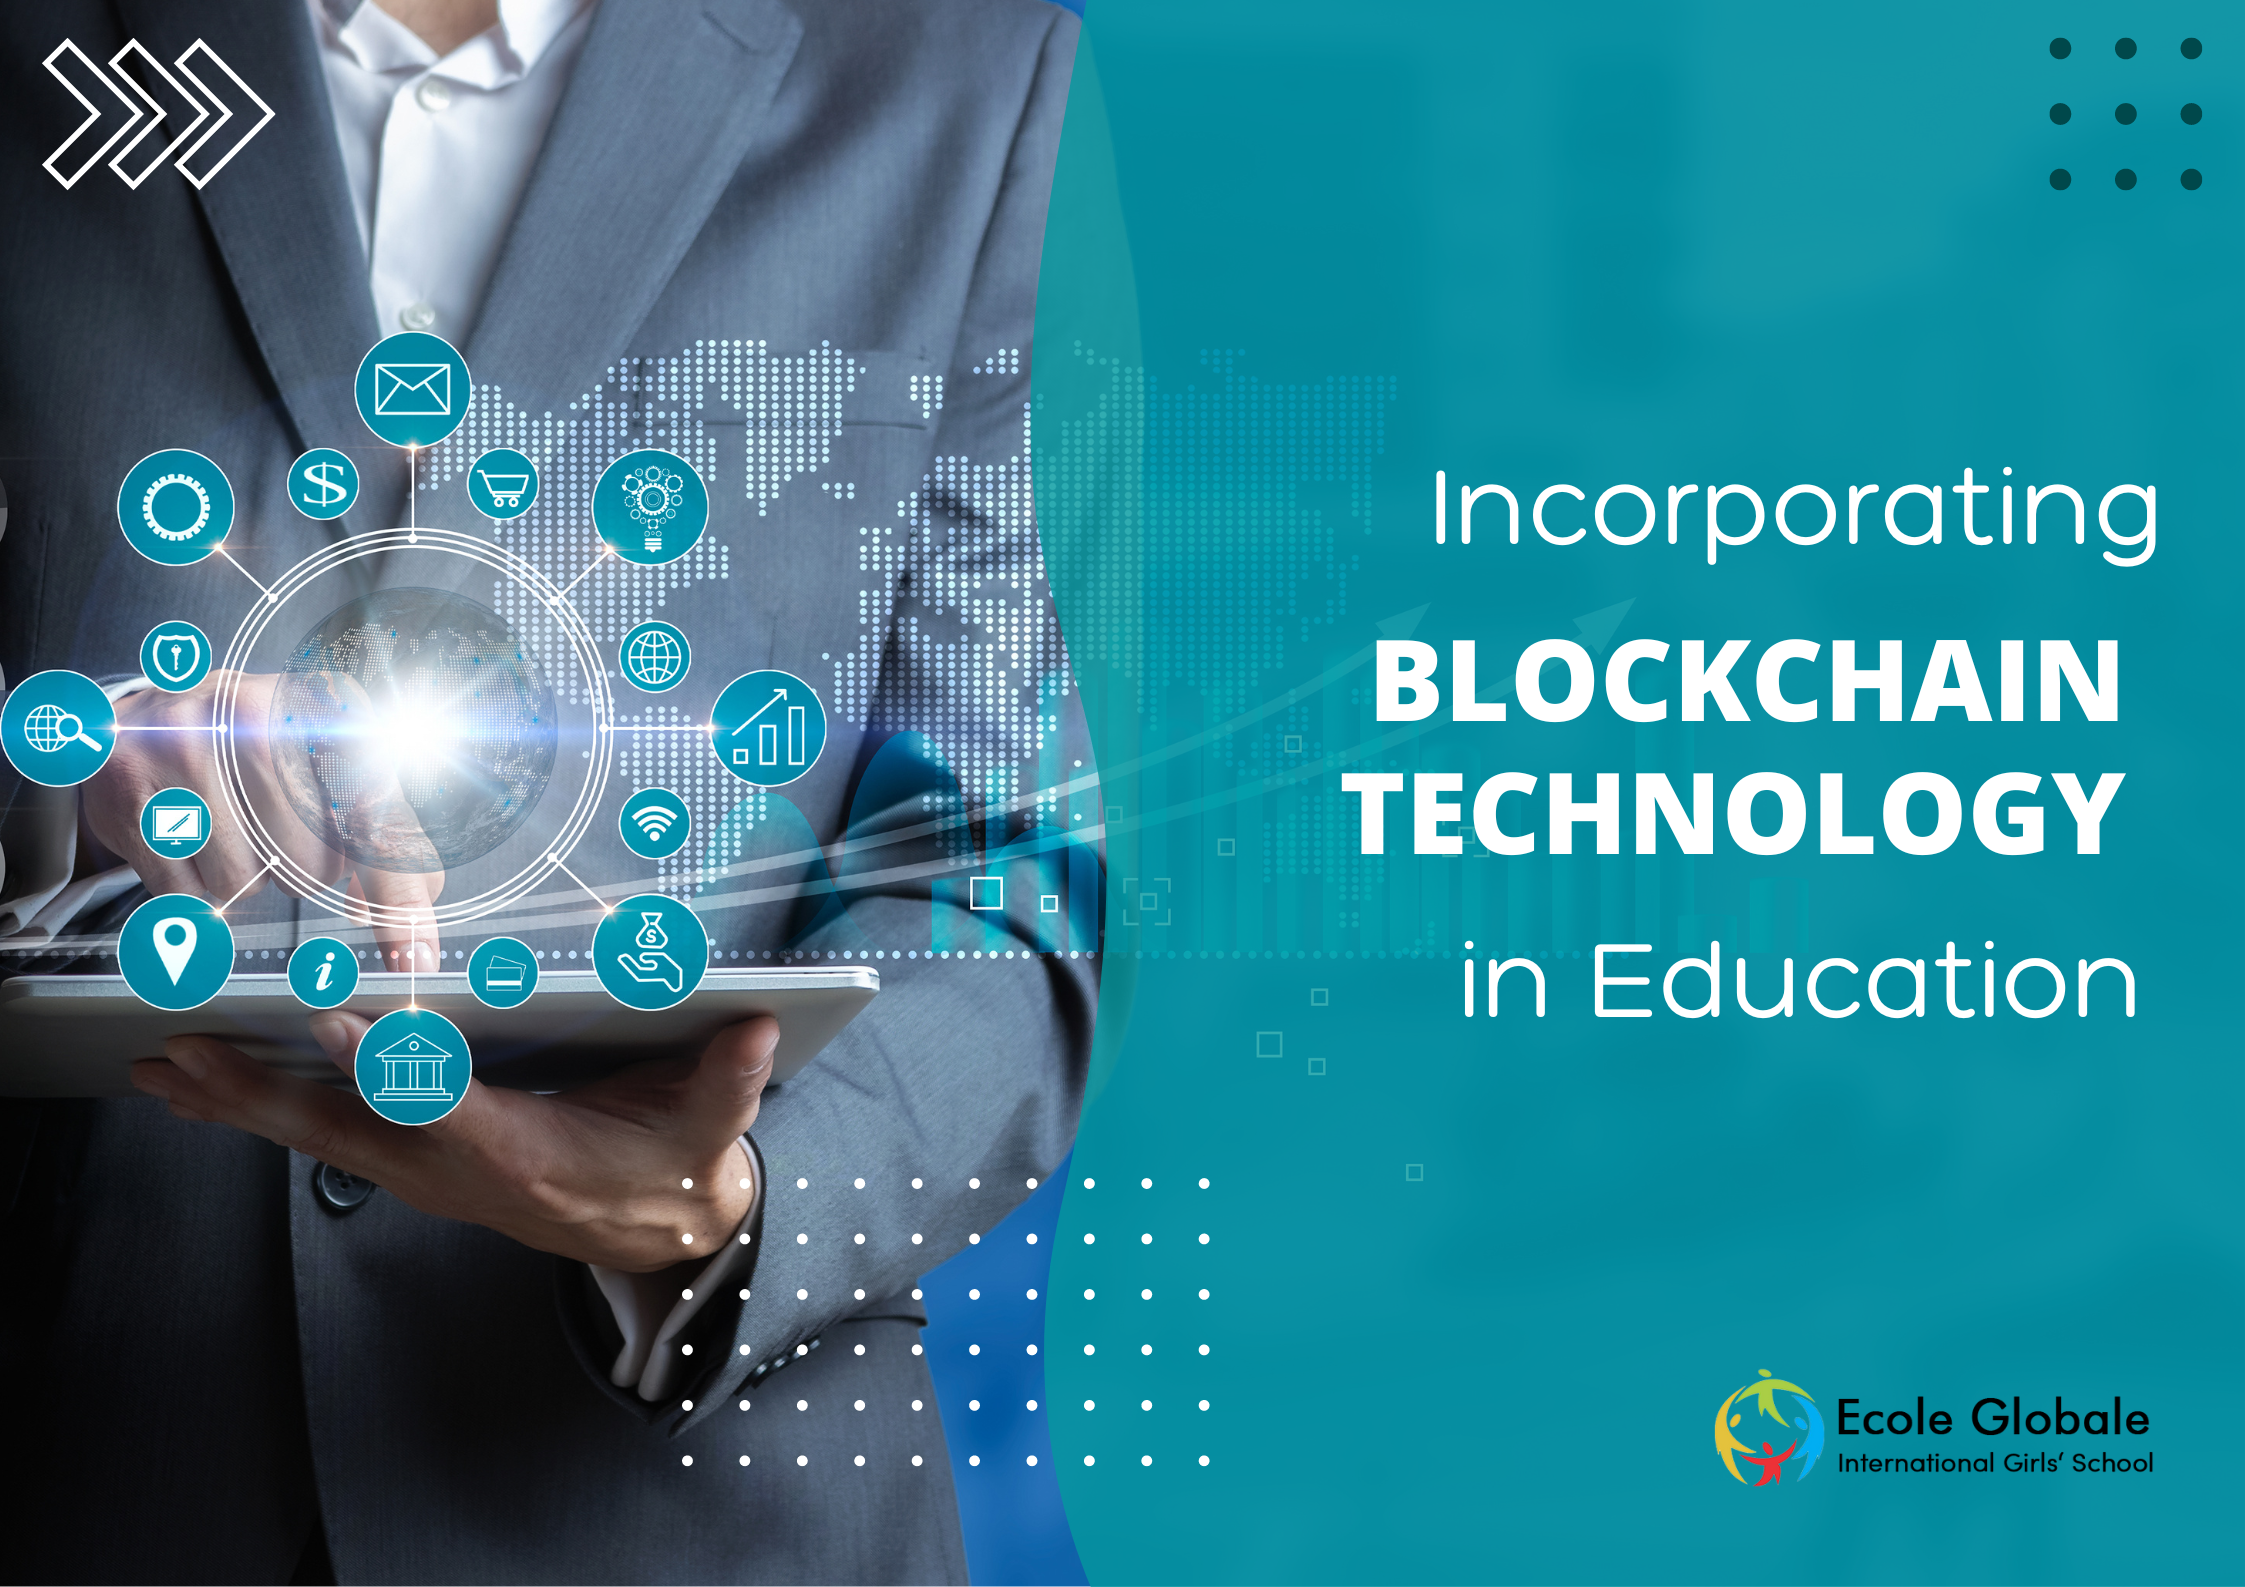 You are currently viewing Incorporating Blockchain Technology in Education: A Future Perspective at Ecole Globale